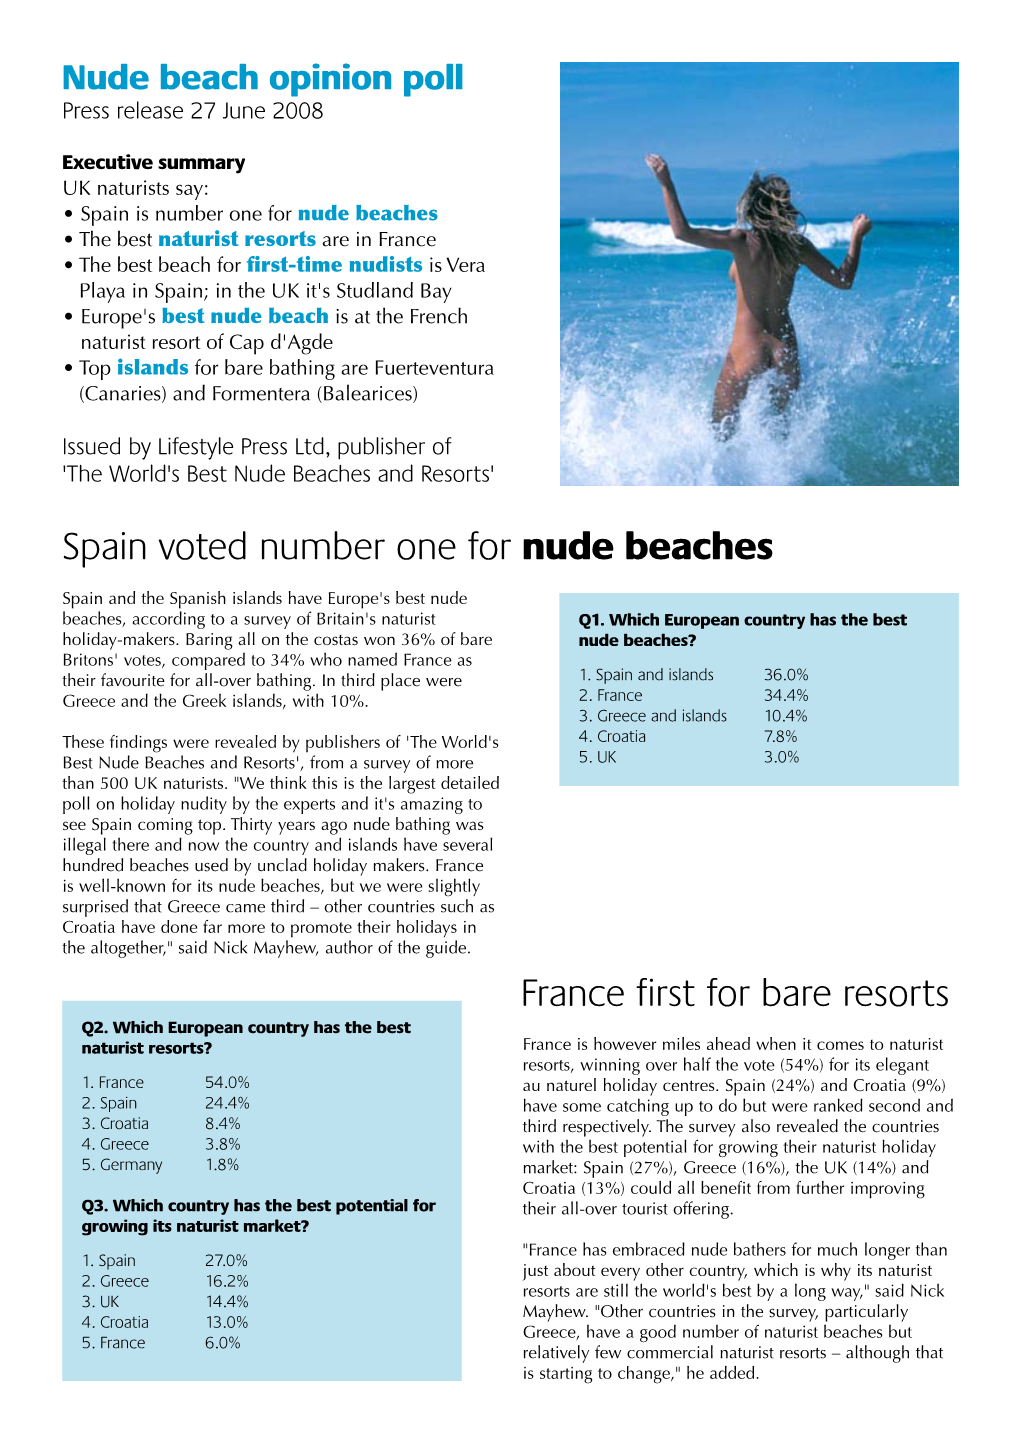 Spain Voted Number One for Nude Beaches France First for Bare Resorts